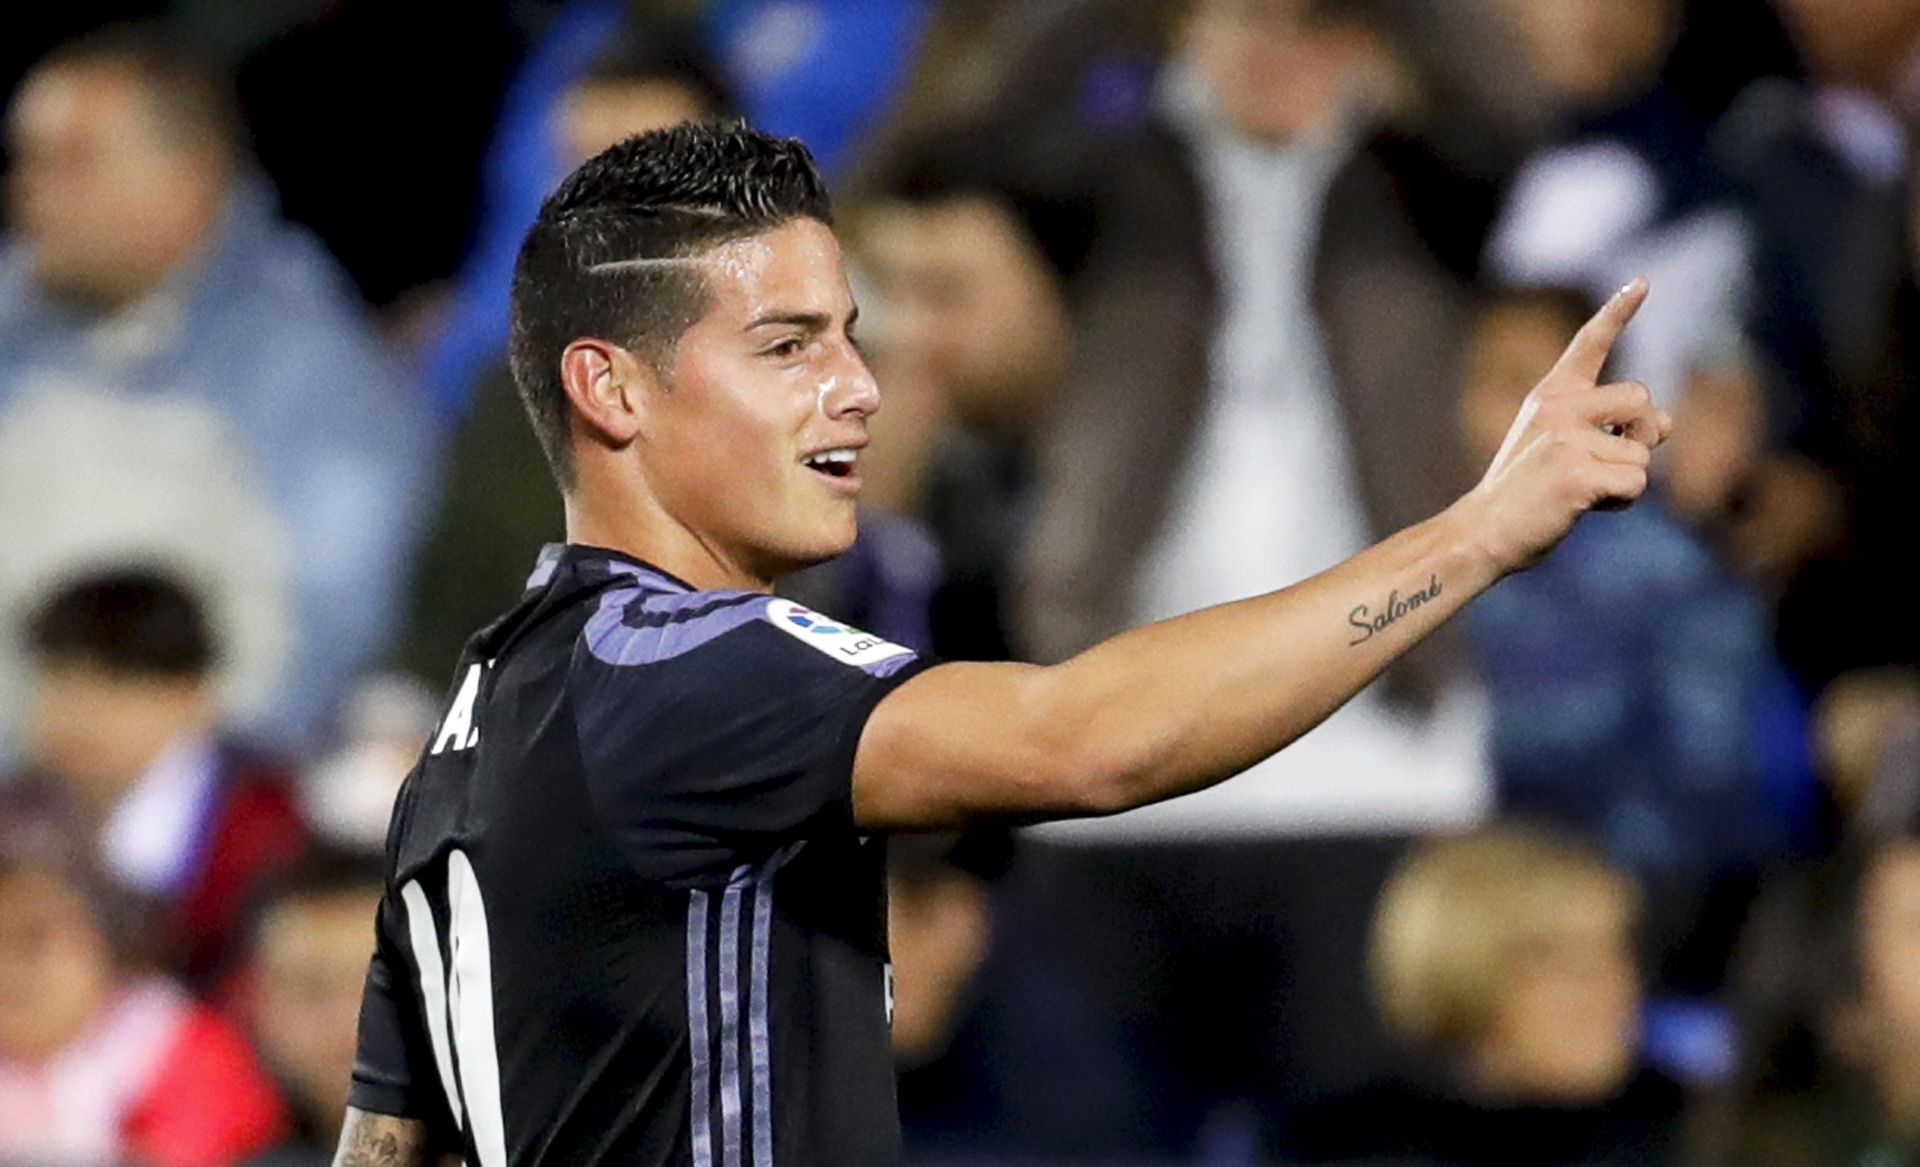 epa06080991 (FILE) - Real Madrid's James Rodriguez celebrates after scoring the opening goal during the Spanish Primera Division soccer match between CD Leganes and Real Madrid at Butarque stadium in Madrid, Spain, 05 April 2017 (reissued 11 July 2017). German Bundesliga soccer club Bayern Munich on 11 July 2017 announced James Rodriguez comes from Spain's Real Madrid on a two-year loan.  EPA/JUANJO MARTIN